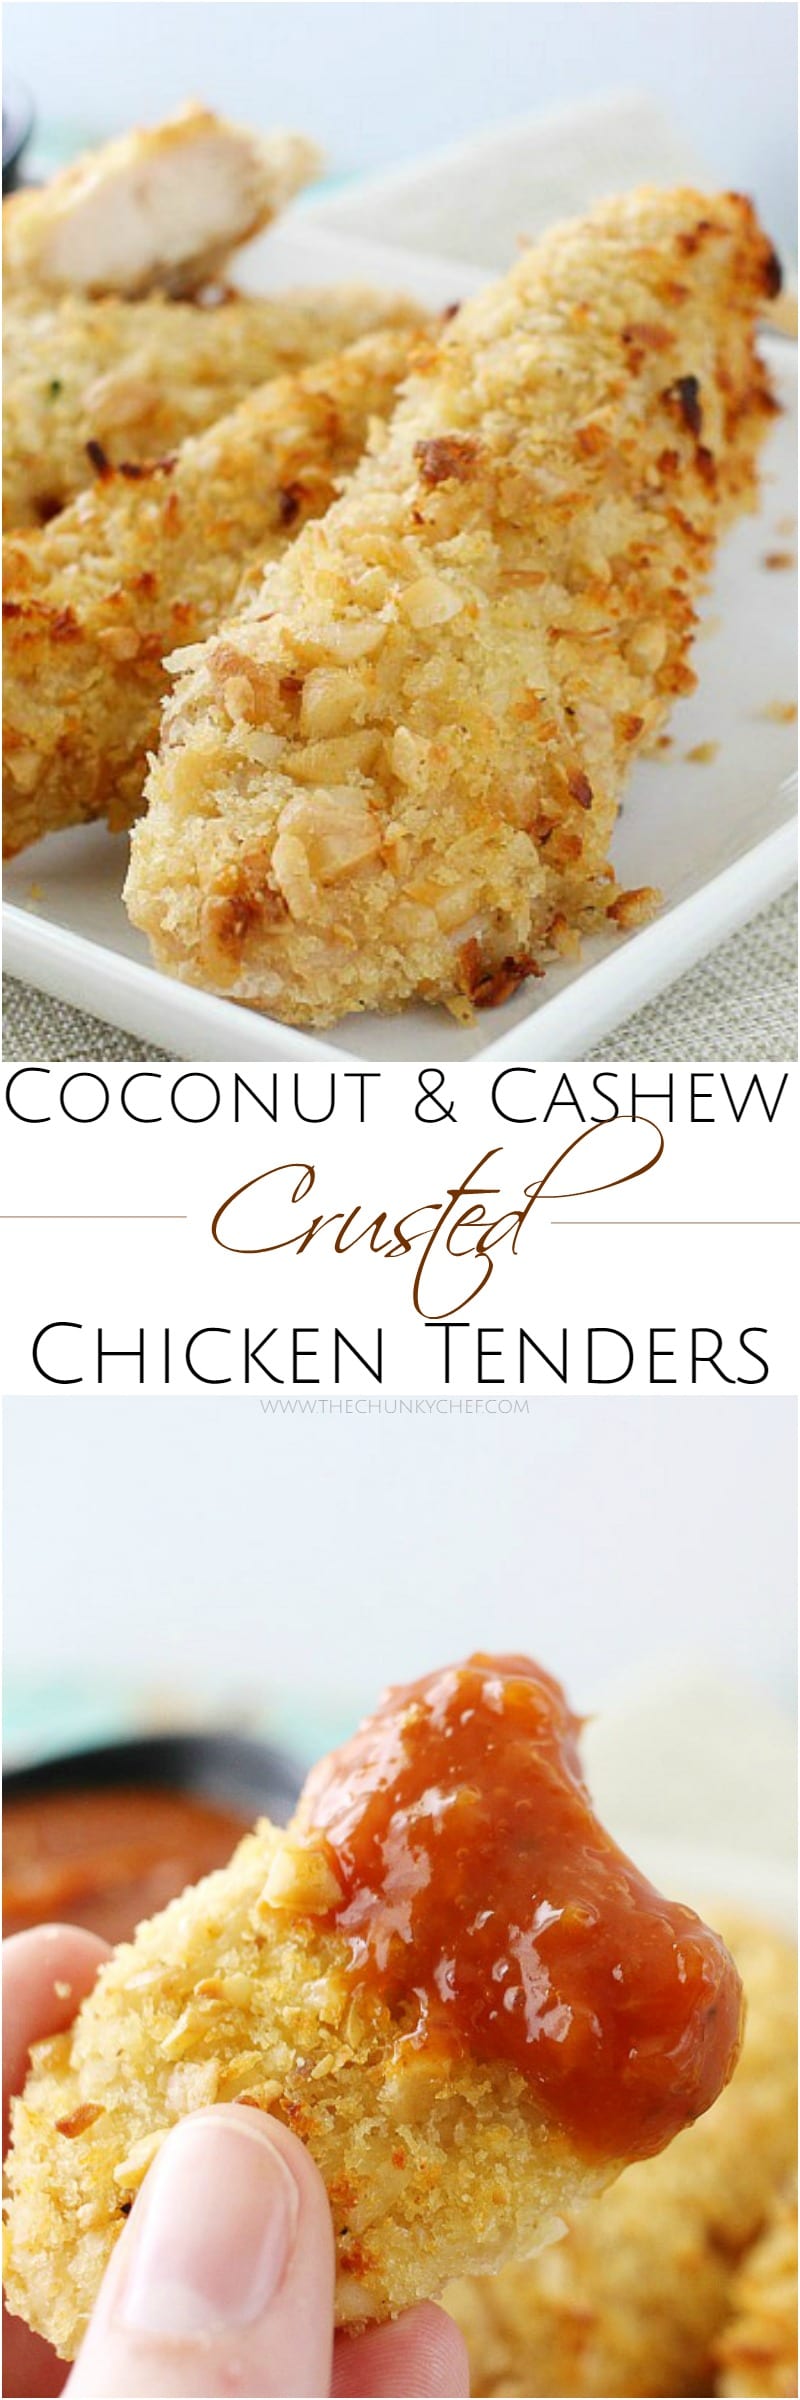 Not your run of the mill baked chicken tenders... this chicken is crusted in a delicious coconut and cashew breading and baked to golden brown perfection!